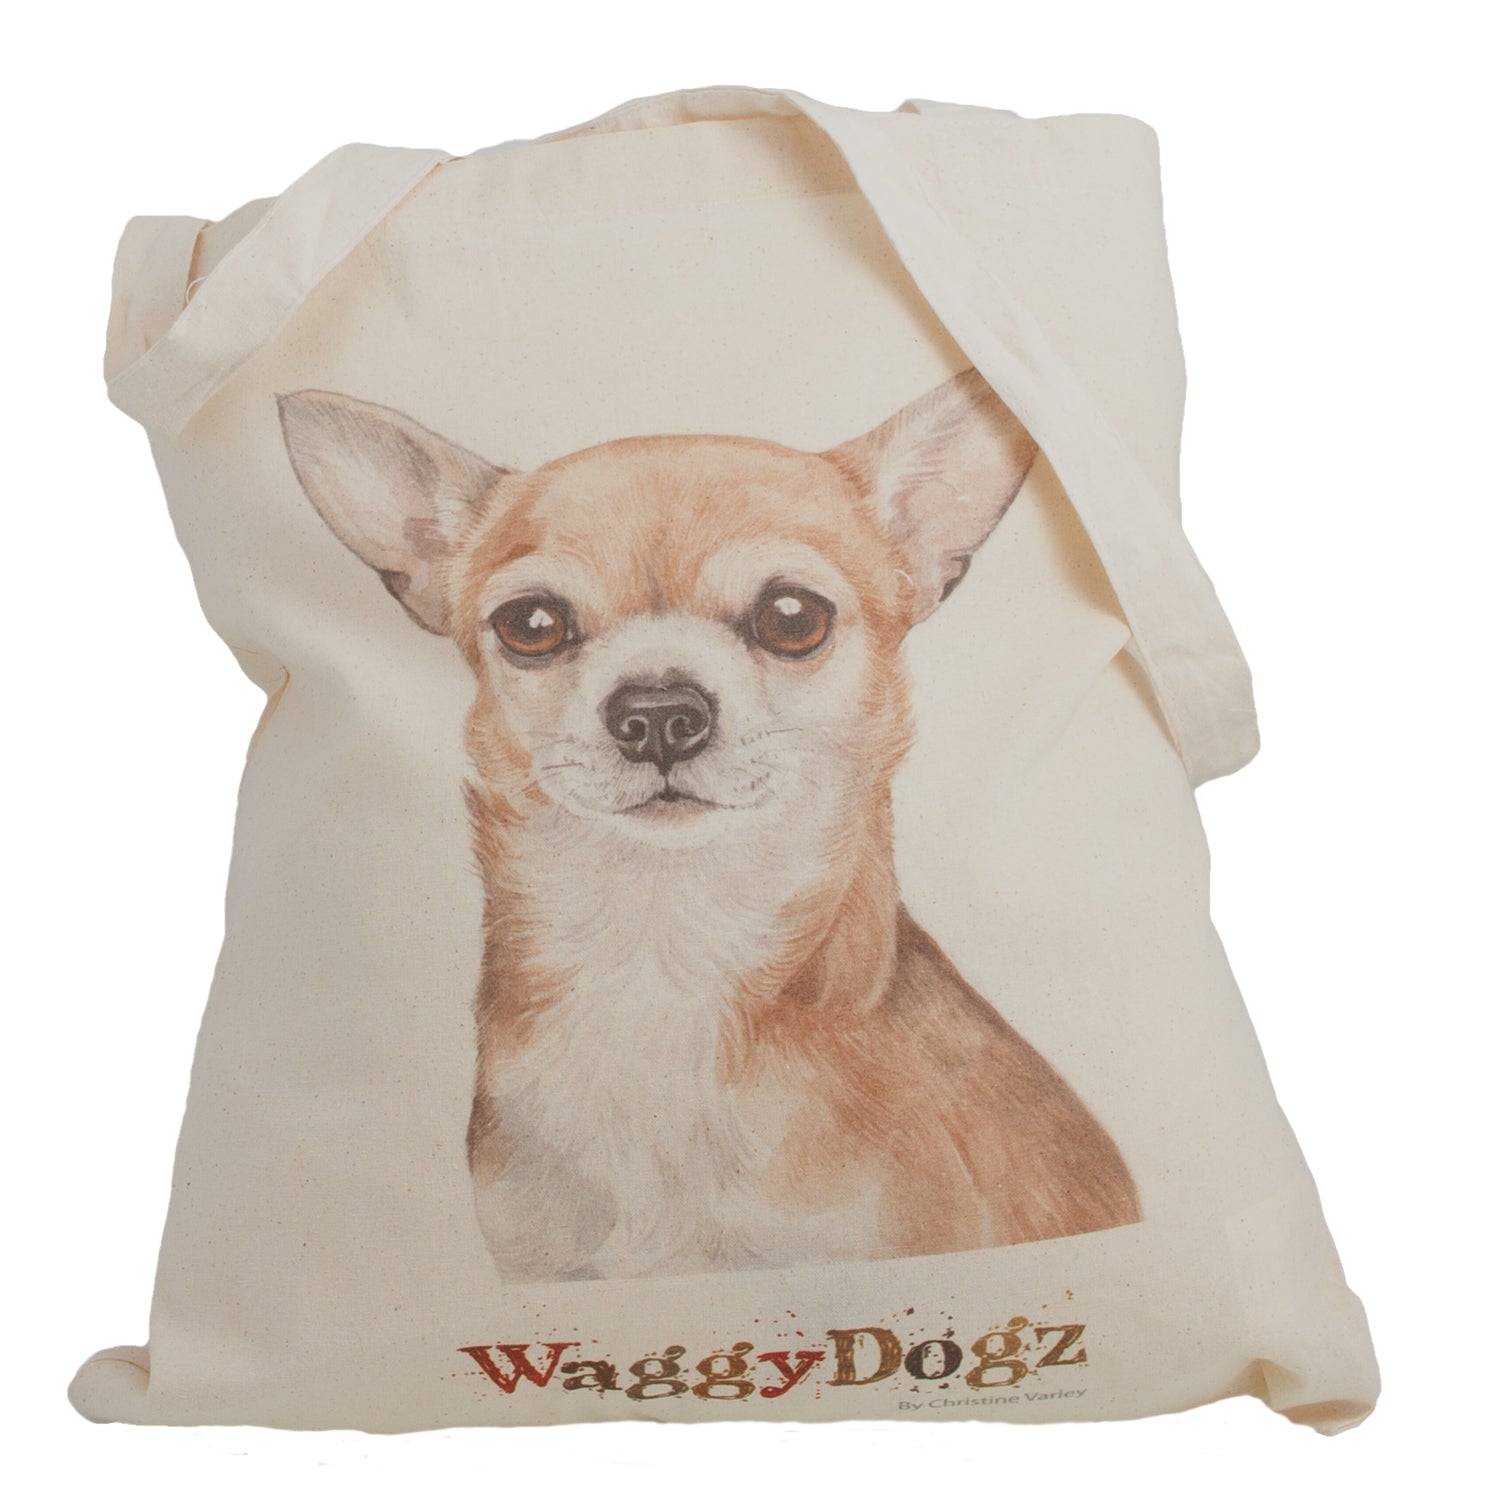 Dog Lover Gifts available at Dog Krazy Gifts. Chihuahua Tote Bag, part of our Christine Varley collection – available at www.dogkrazygifts.co.uk